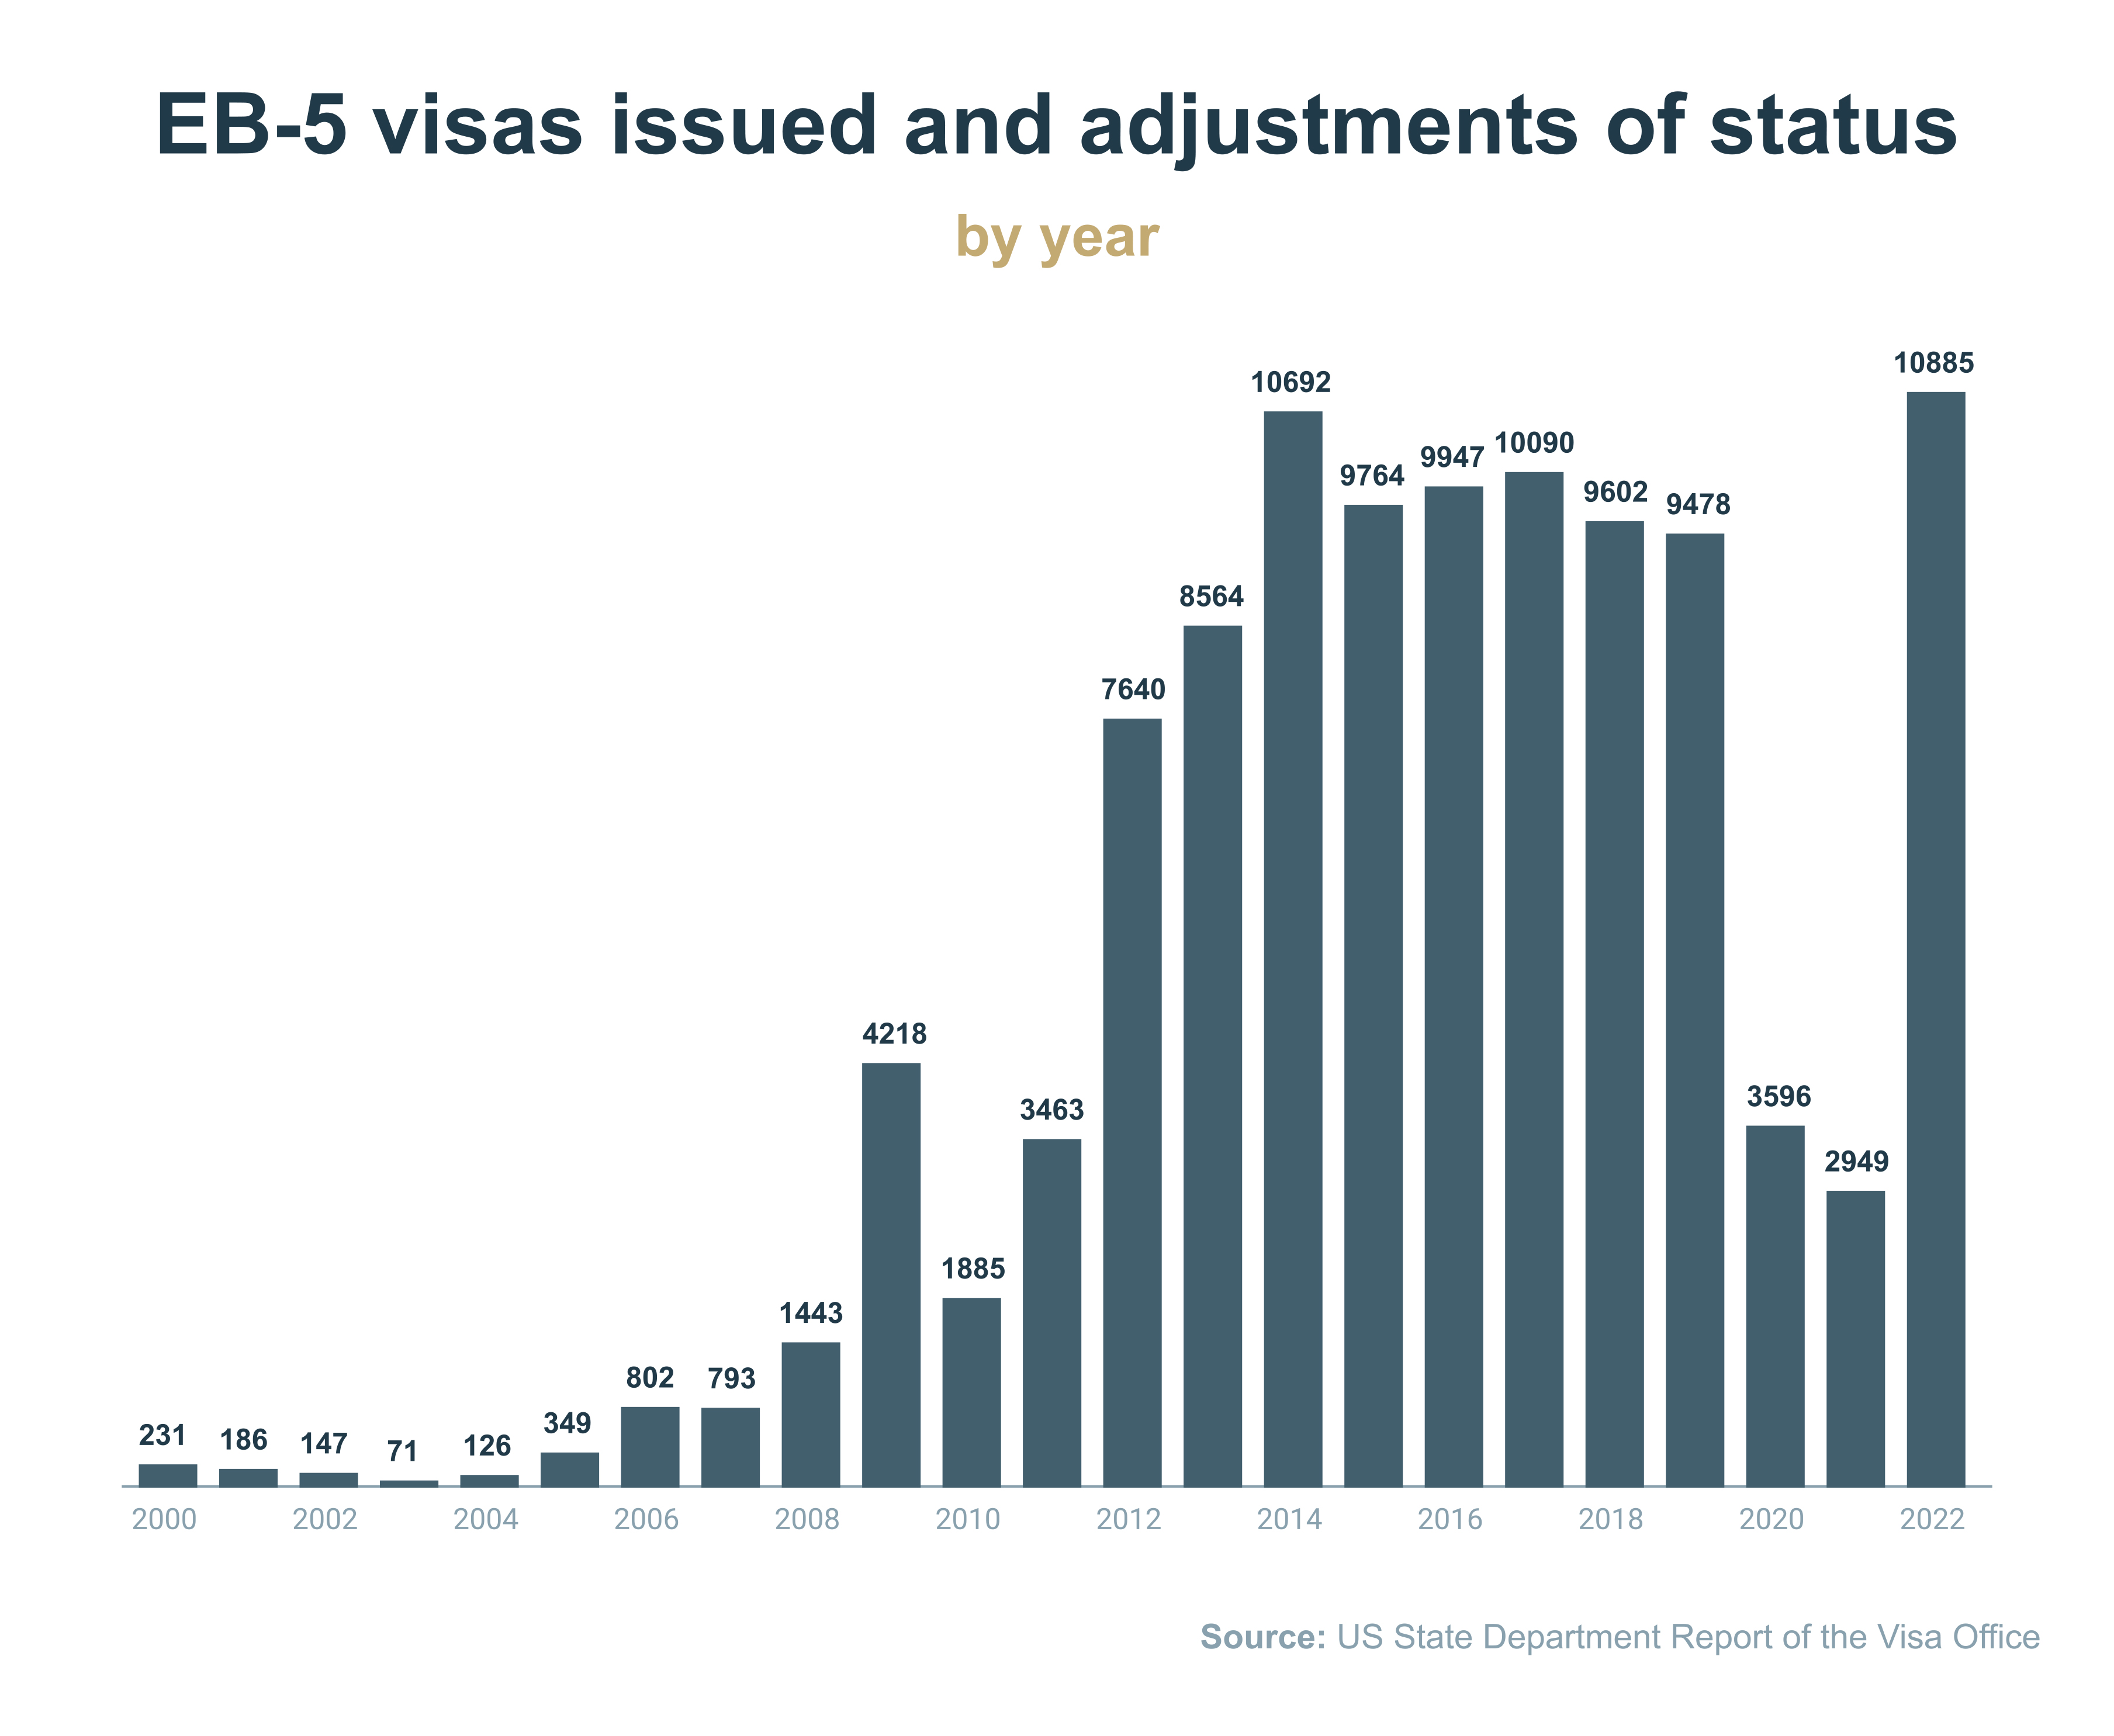 EB-5 visas issued and adjustments of status by year